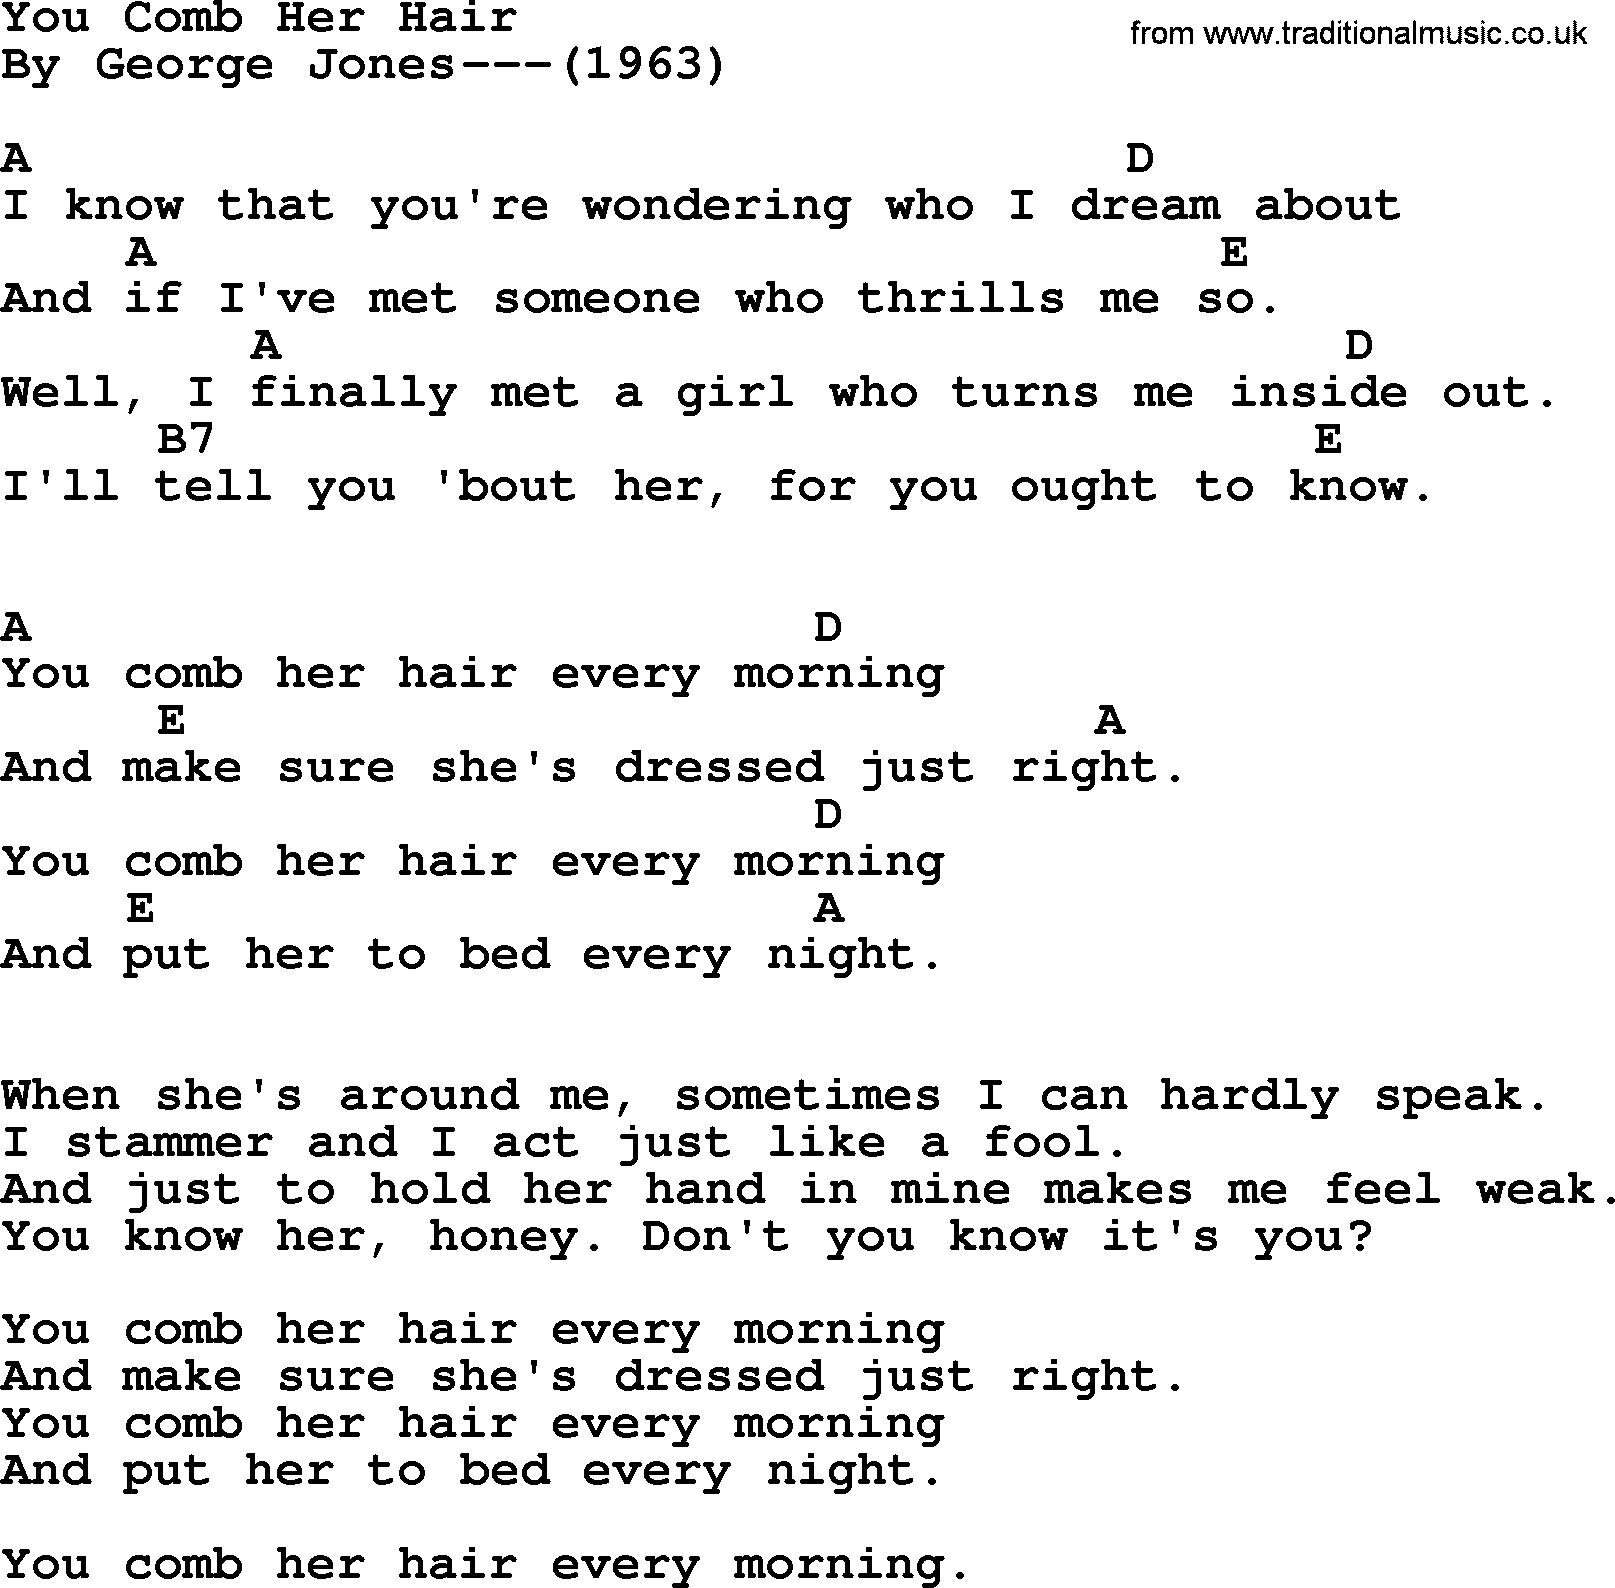 George Jones song: You Comb Her Hair, lyrics and chords